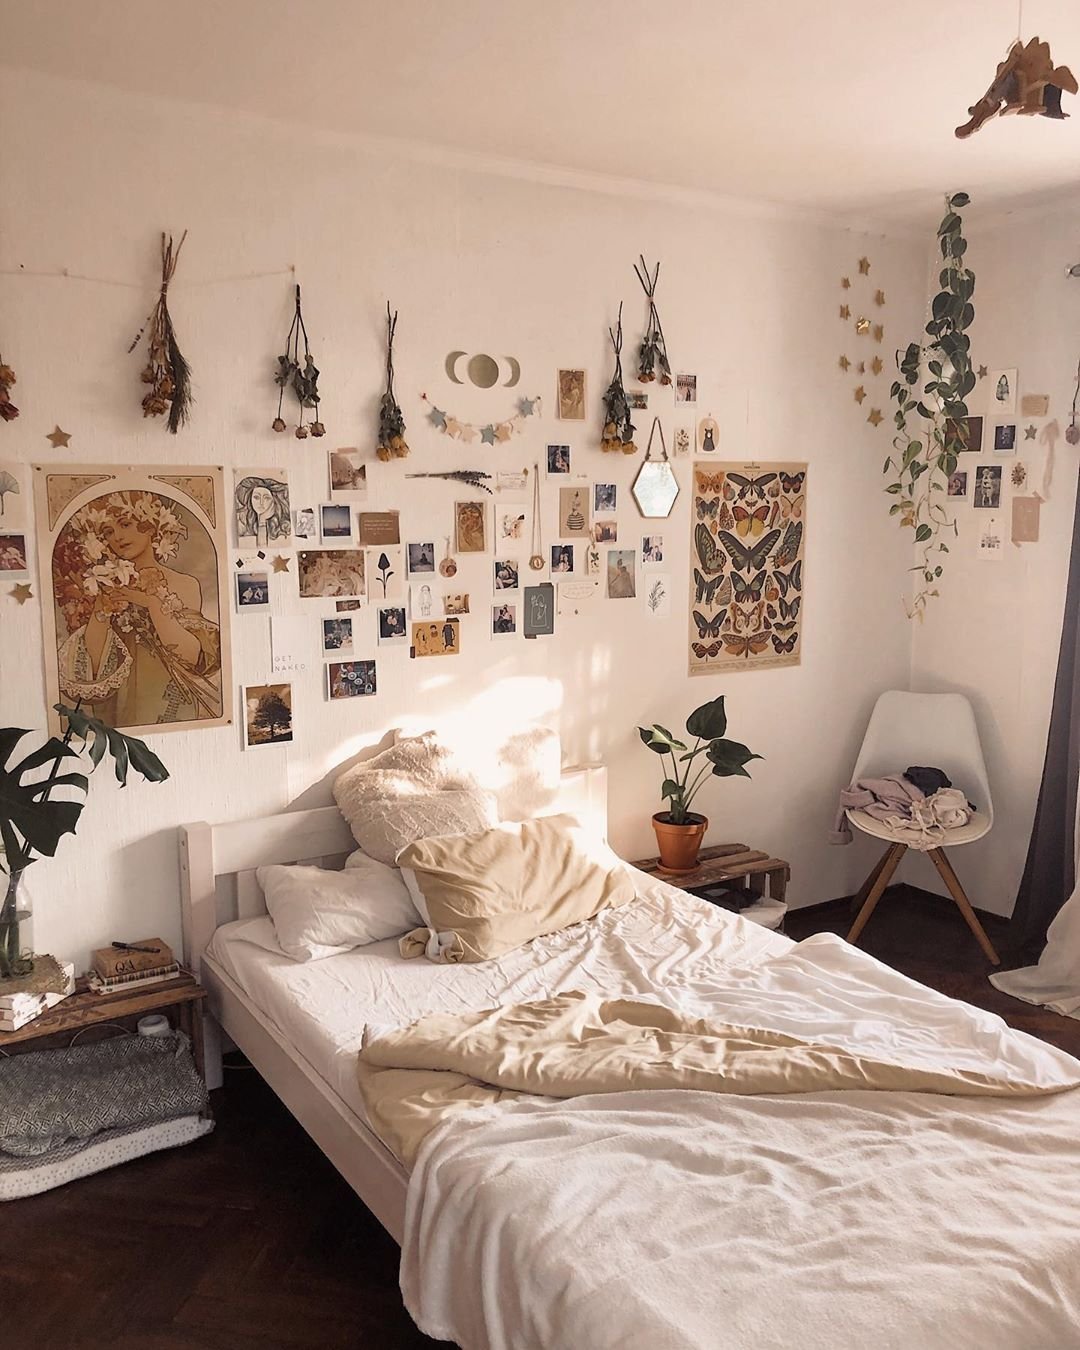 Idées déco chambre aesthetic #aesthetic #aestheticroom #aestheticdecor